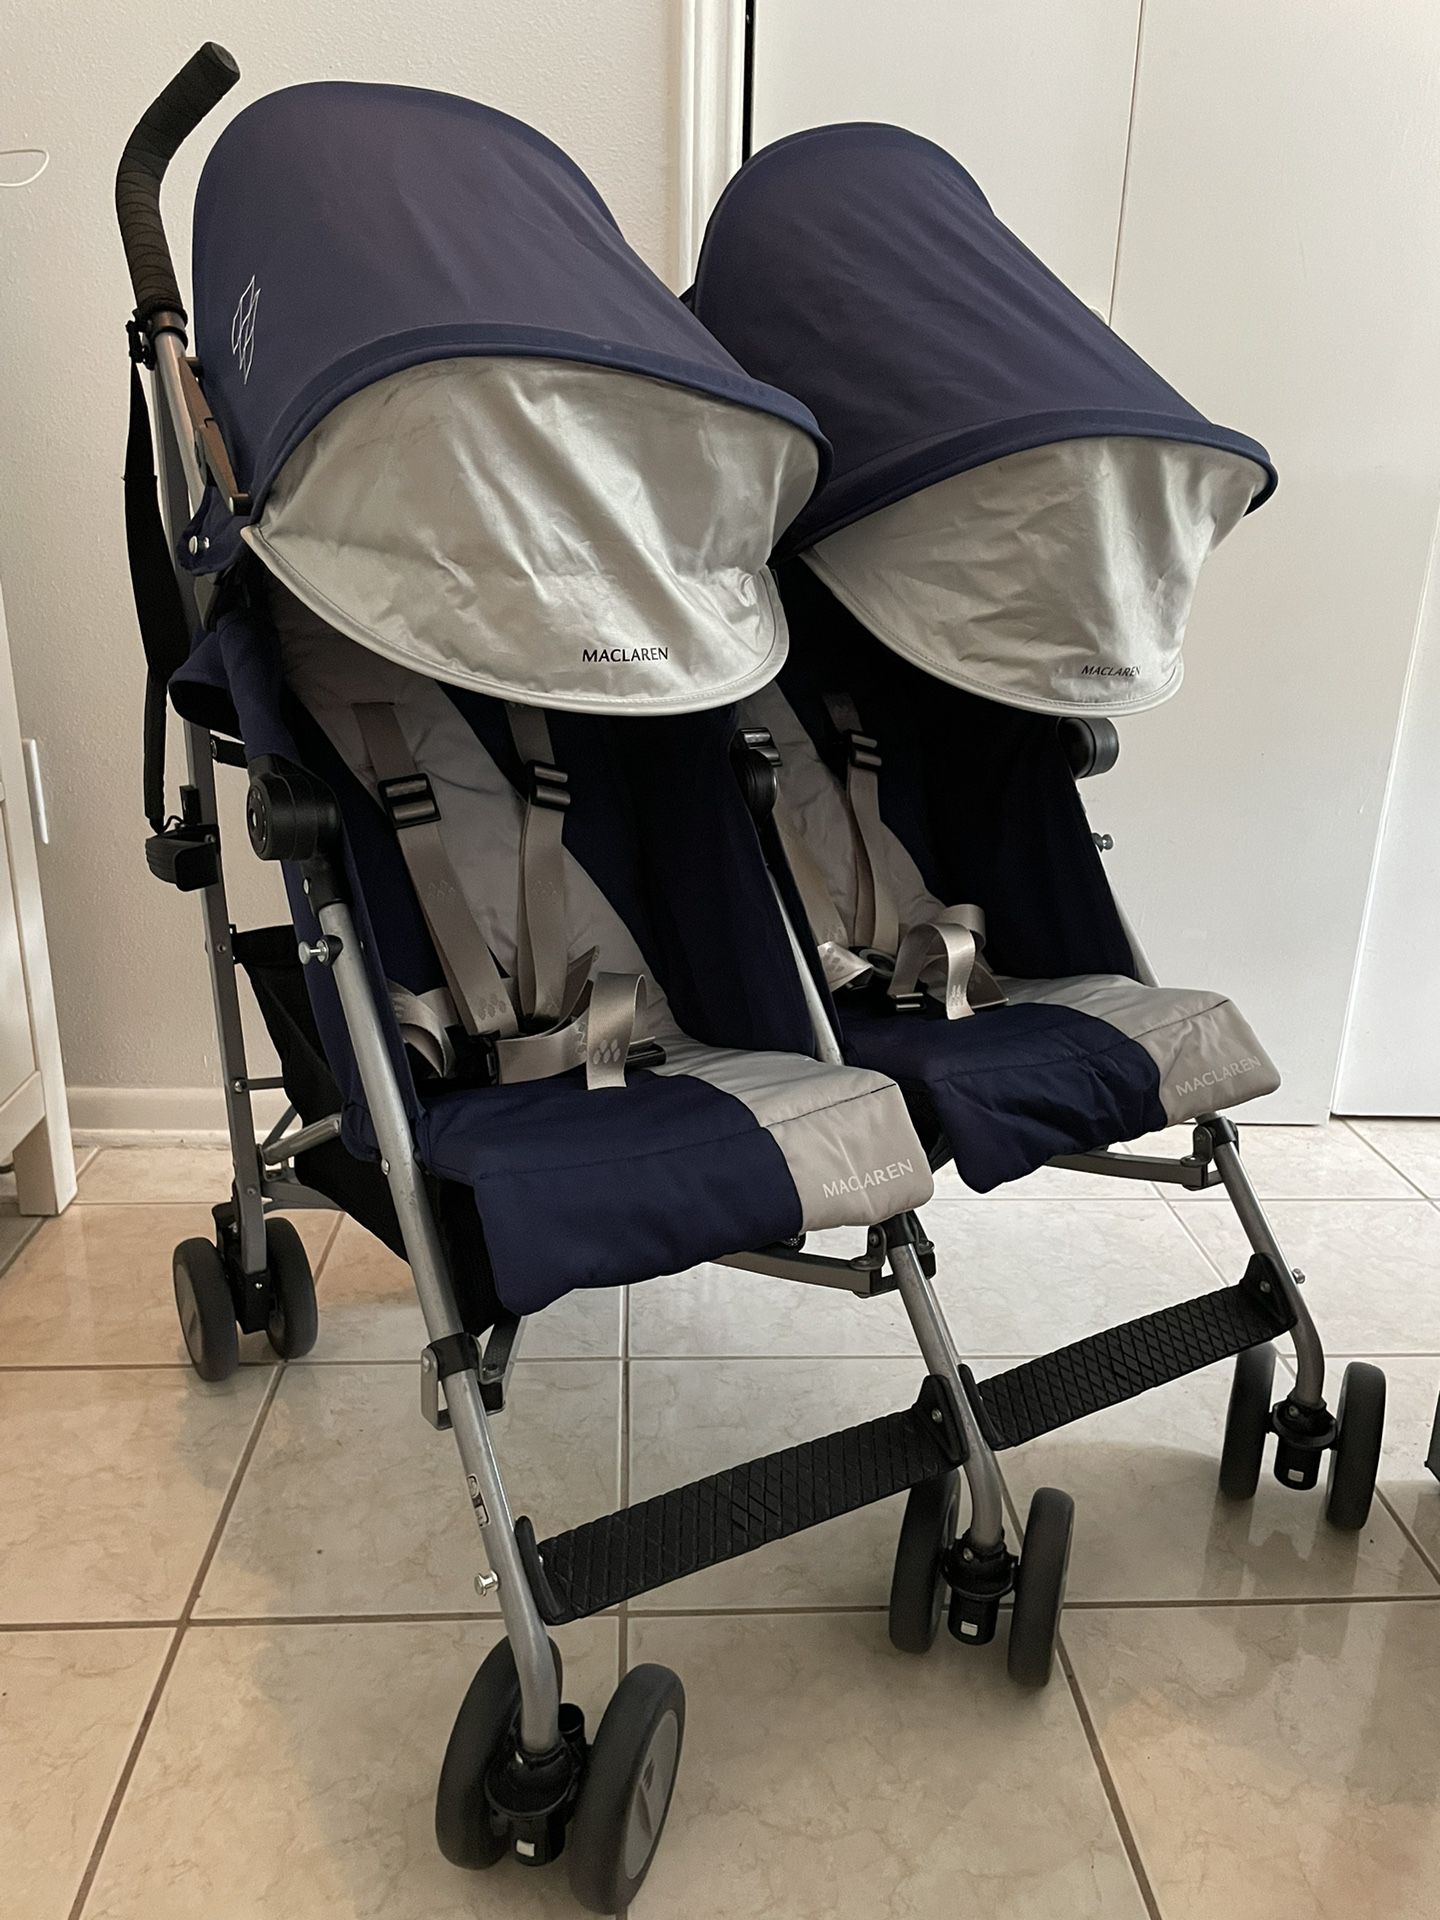 MacLaren Twin Triumph Double Stroller (6 months to 3 years)